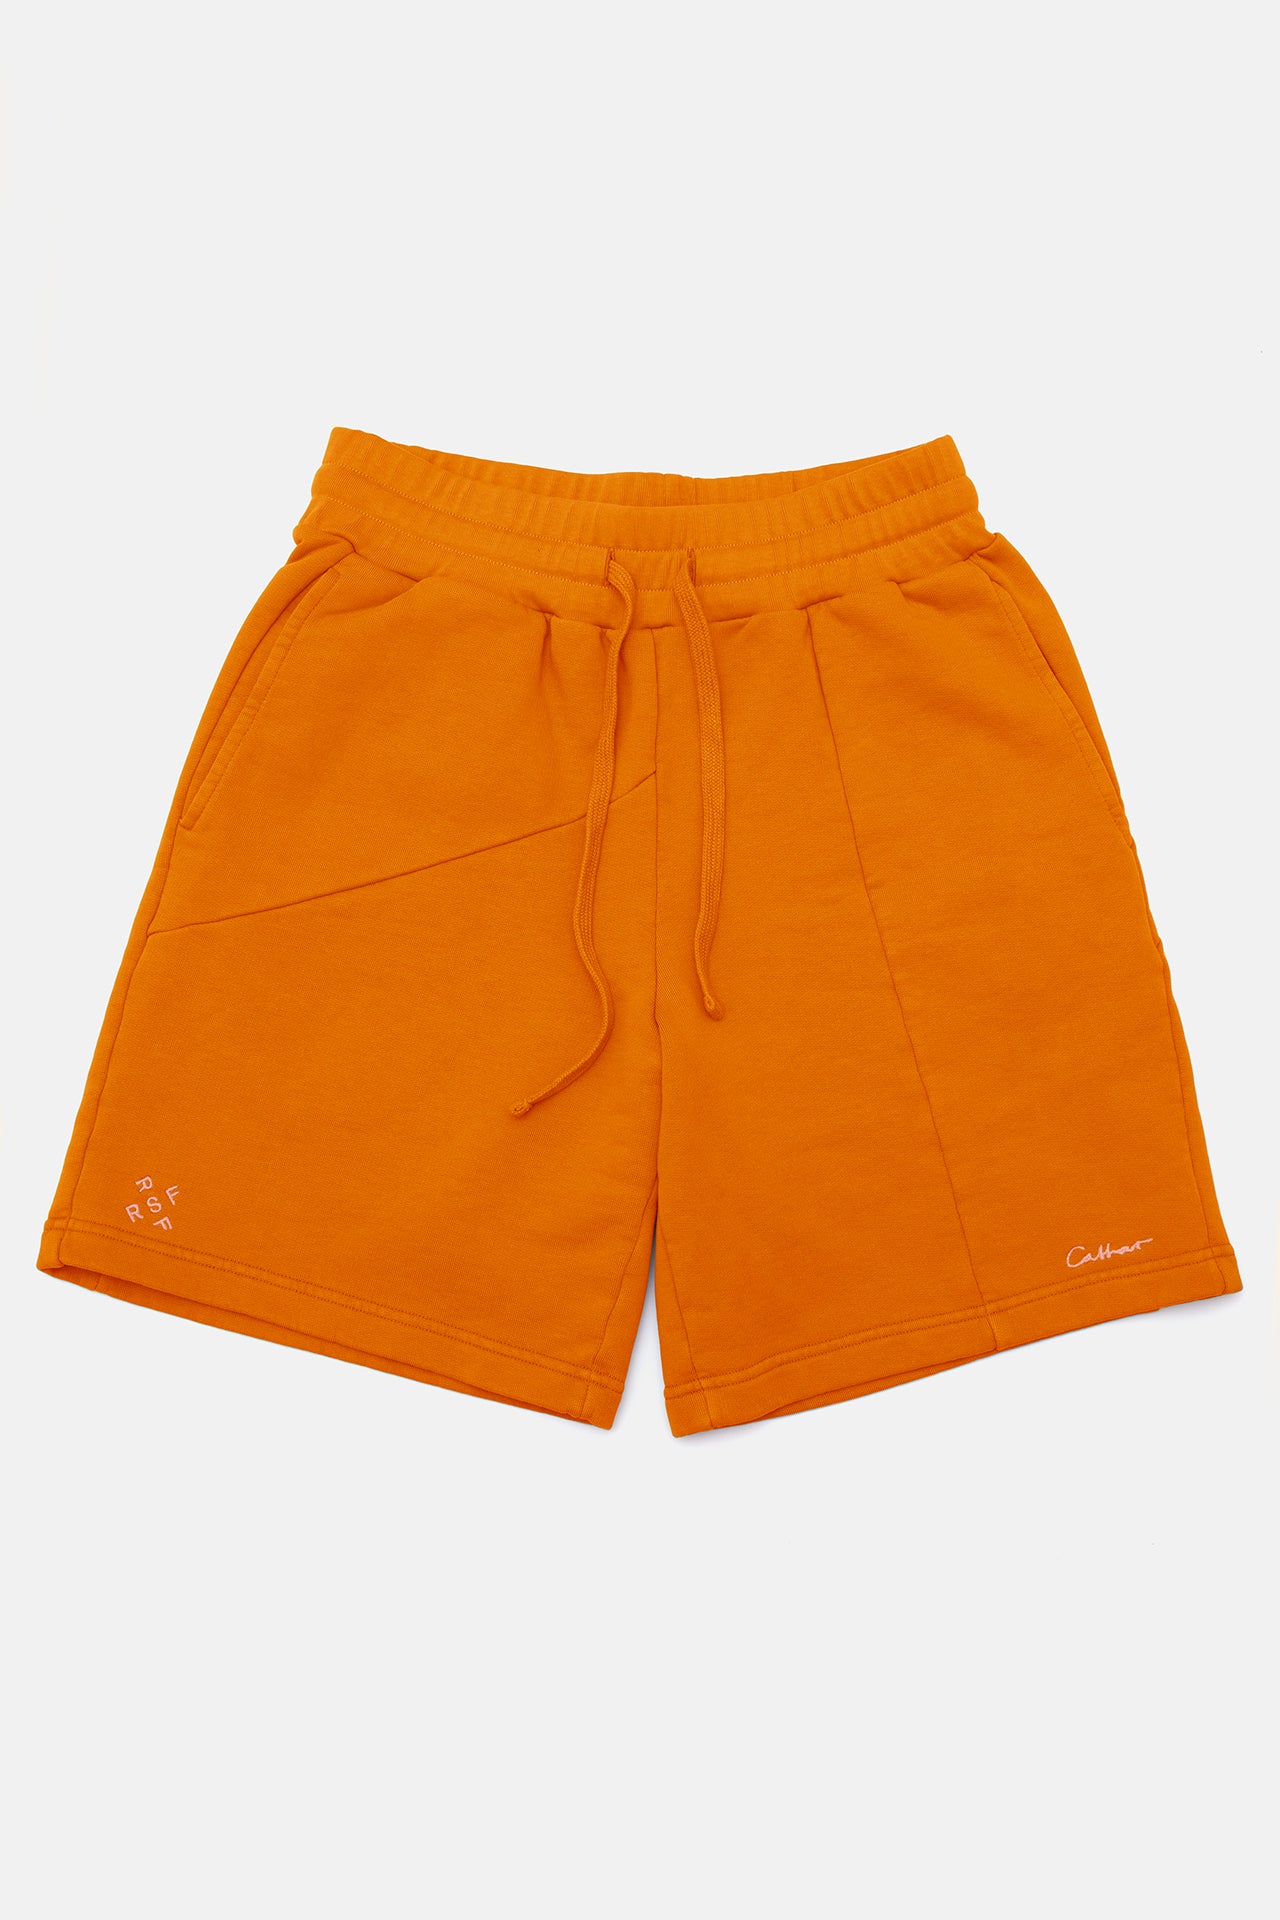 RSF x DC Deconstructed Terry Shorts¬†Rusty Orange - Retrosuperfuture -